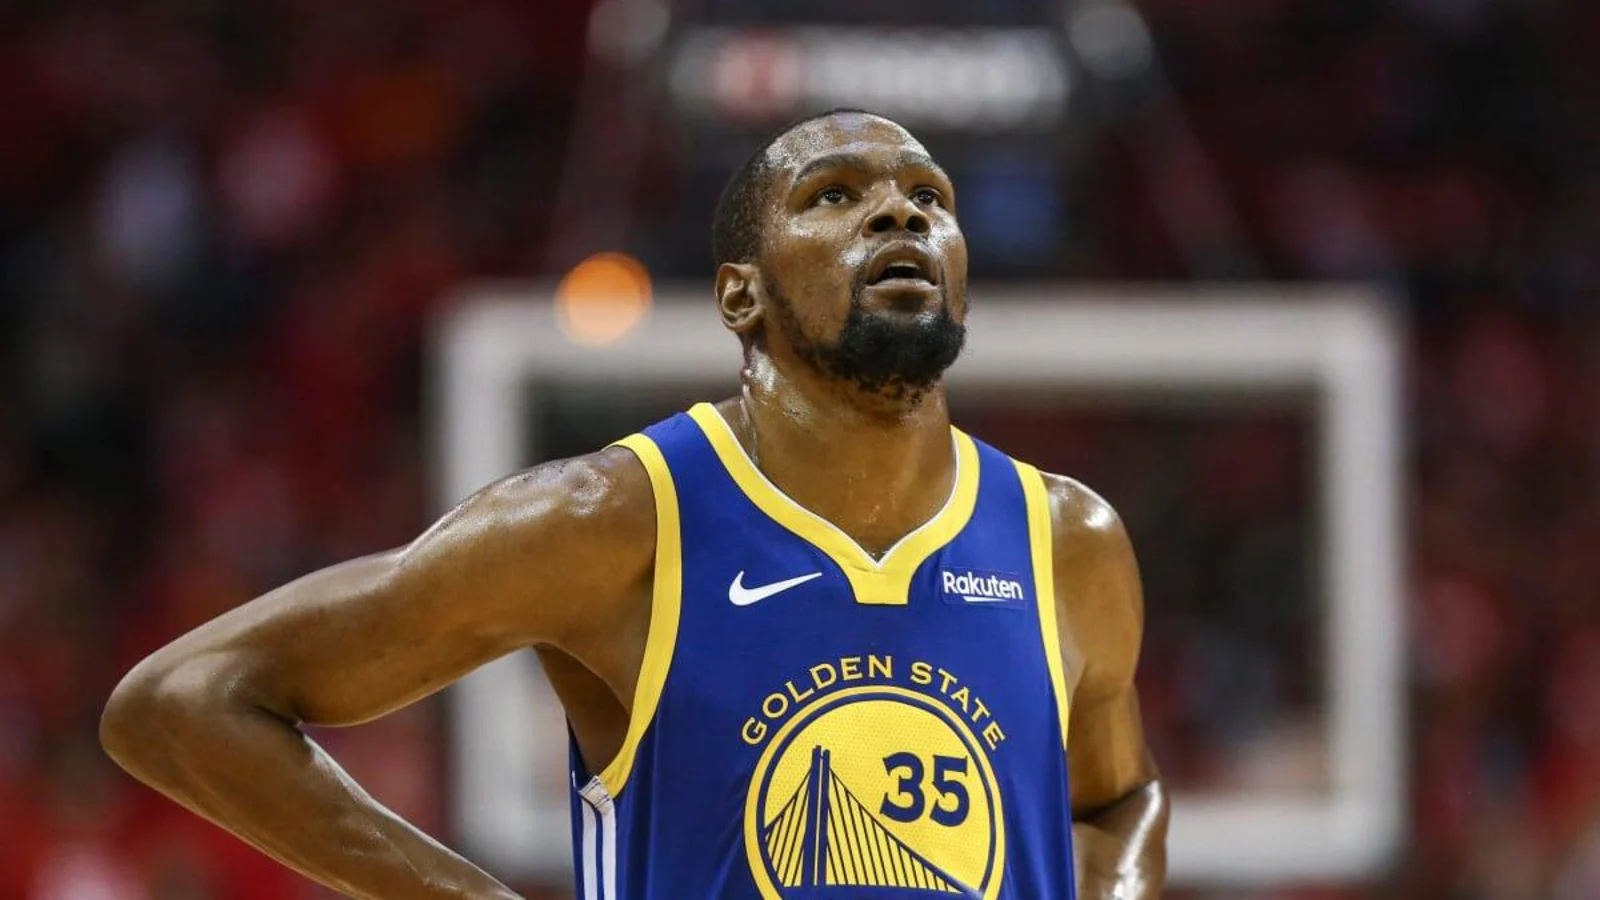 The Golden State Warriors will honor Kevin Durant on NBA opening night